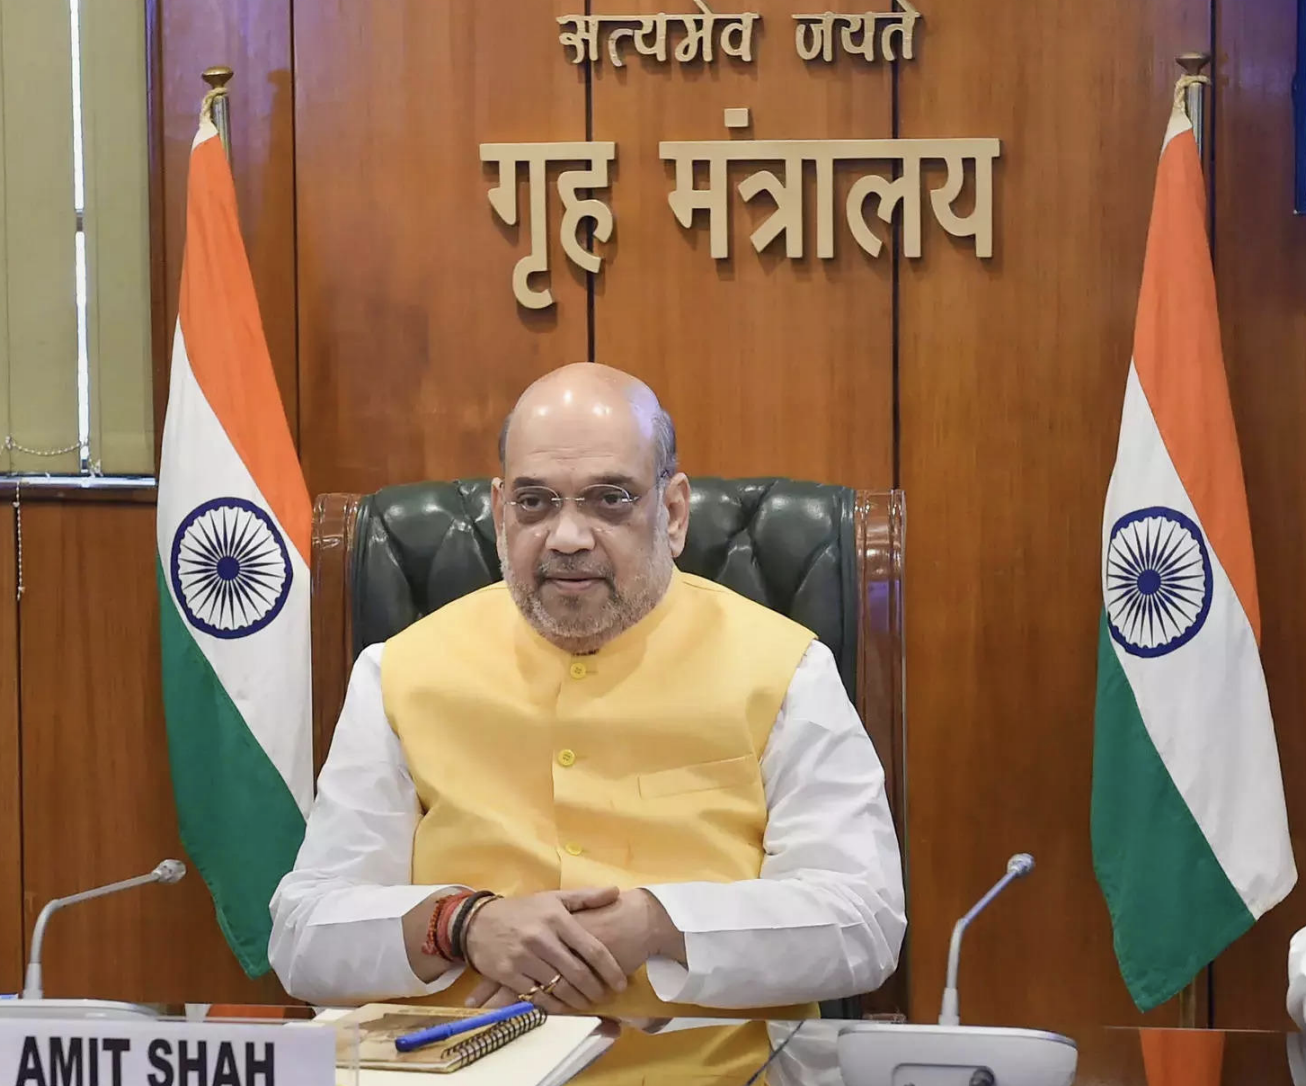 HM Amit Shah says government has repealed around 2,000 irrelevant laws since 2015